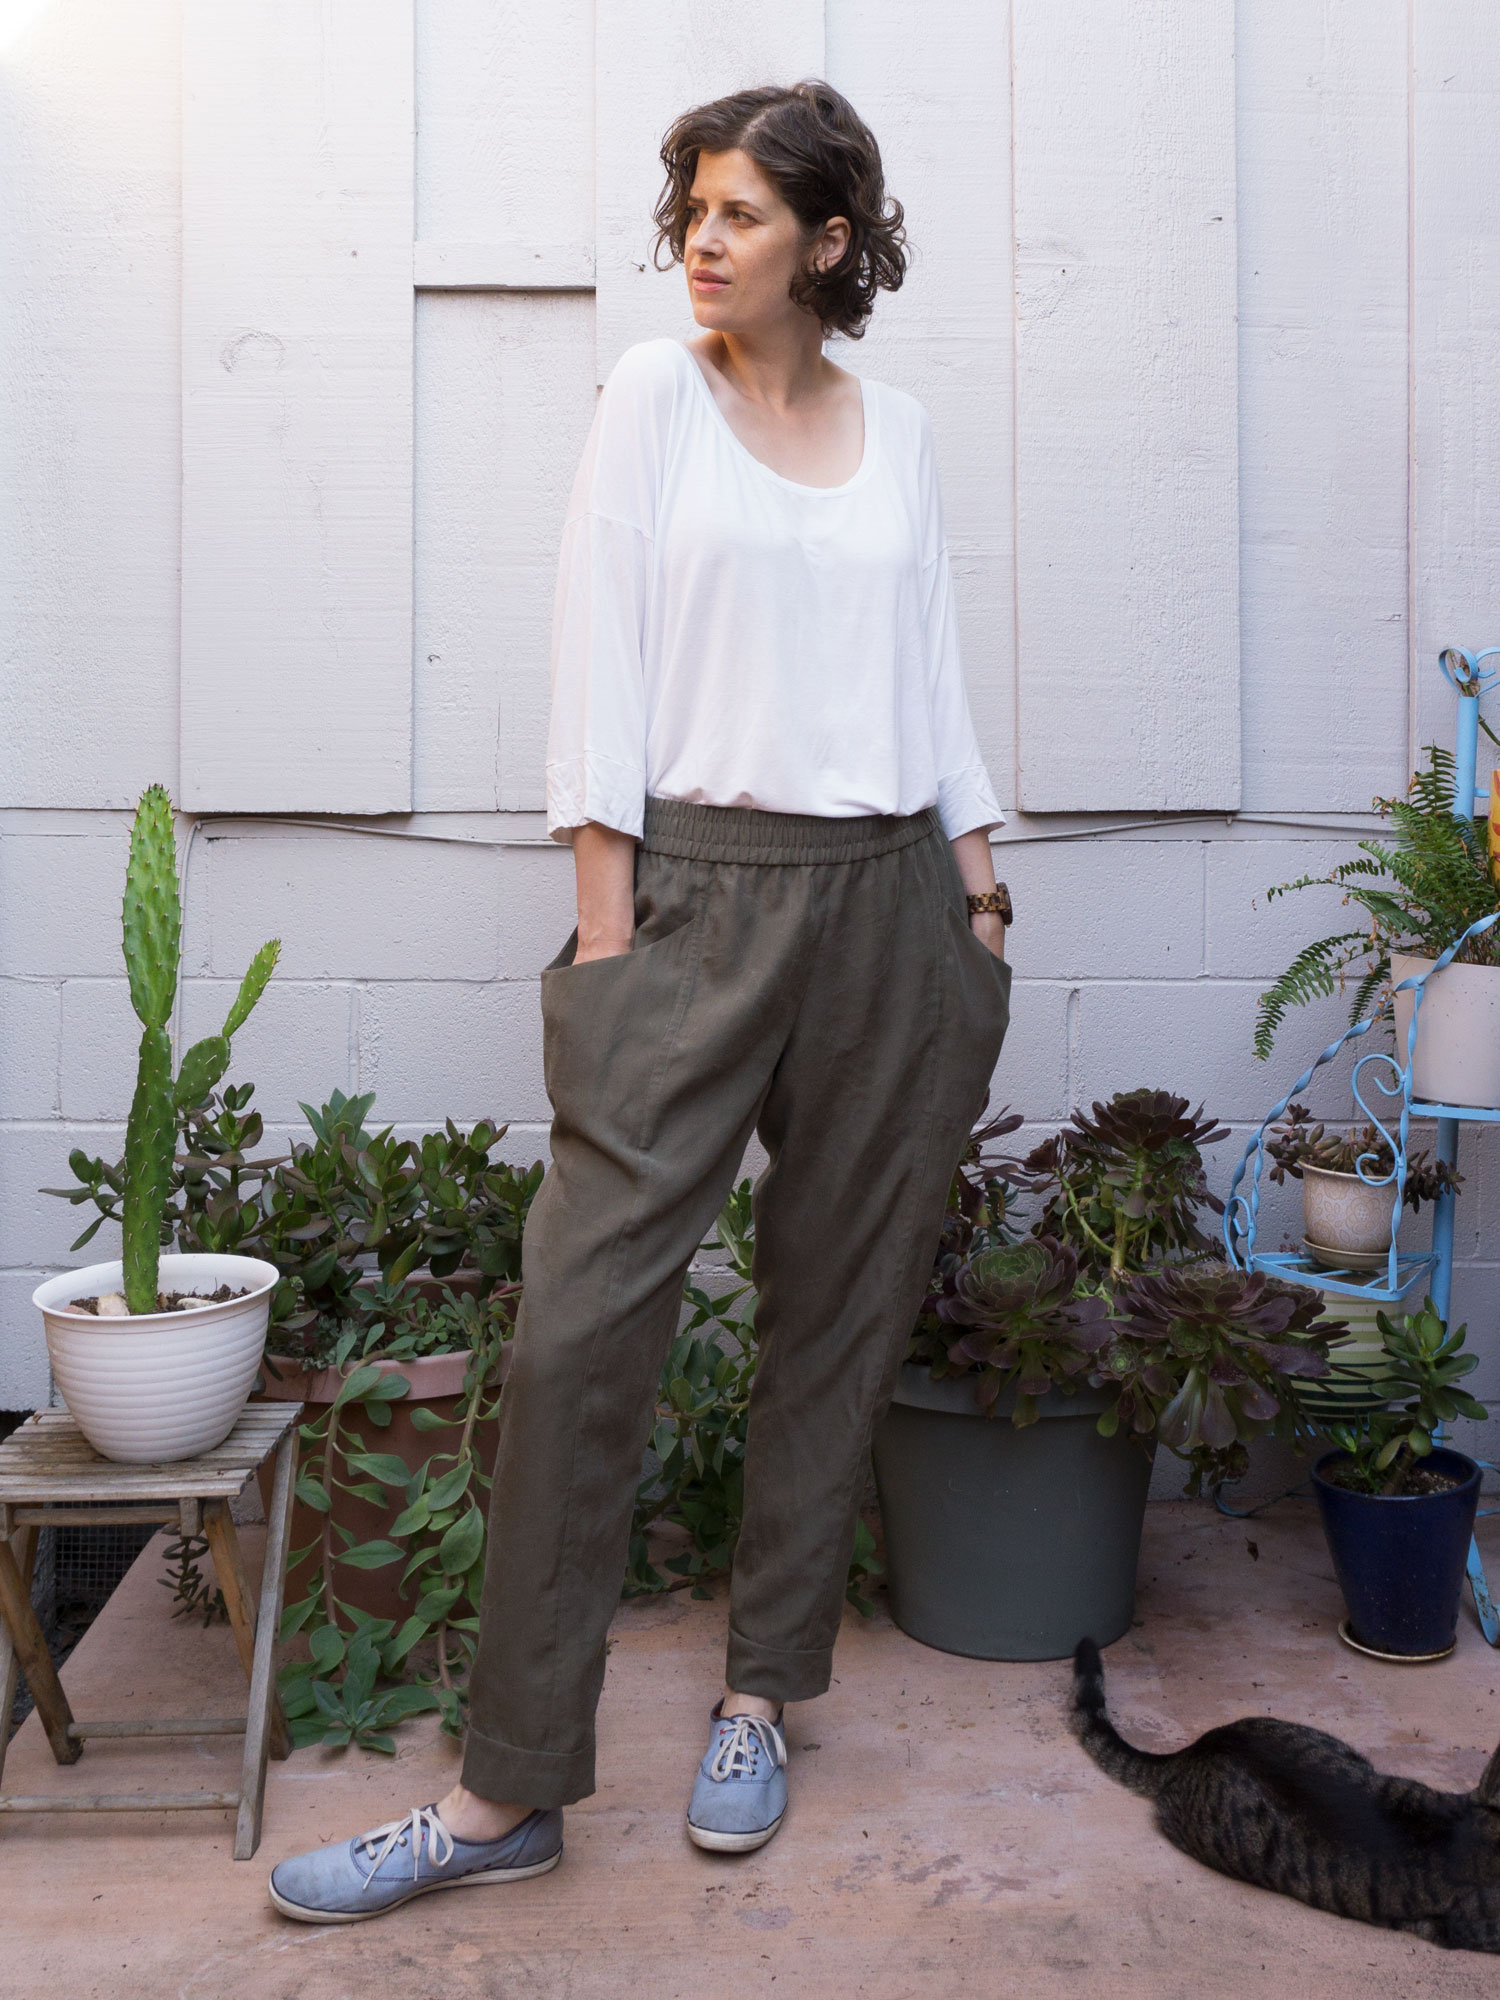 Review of the Arenite Pants sewing pattern by Sew Liberated — Sew DIY